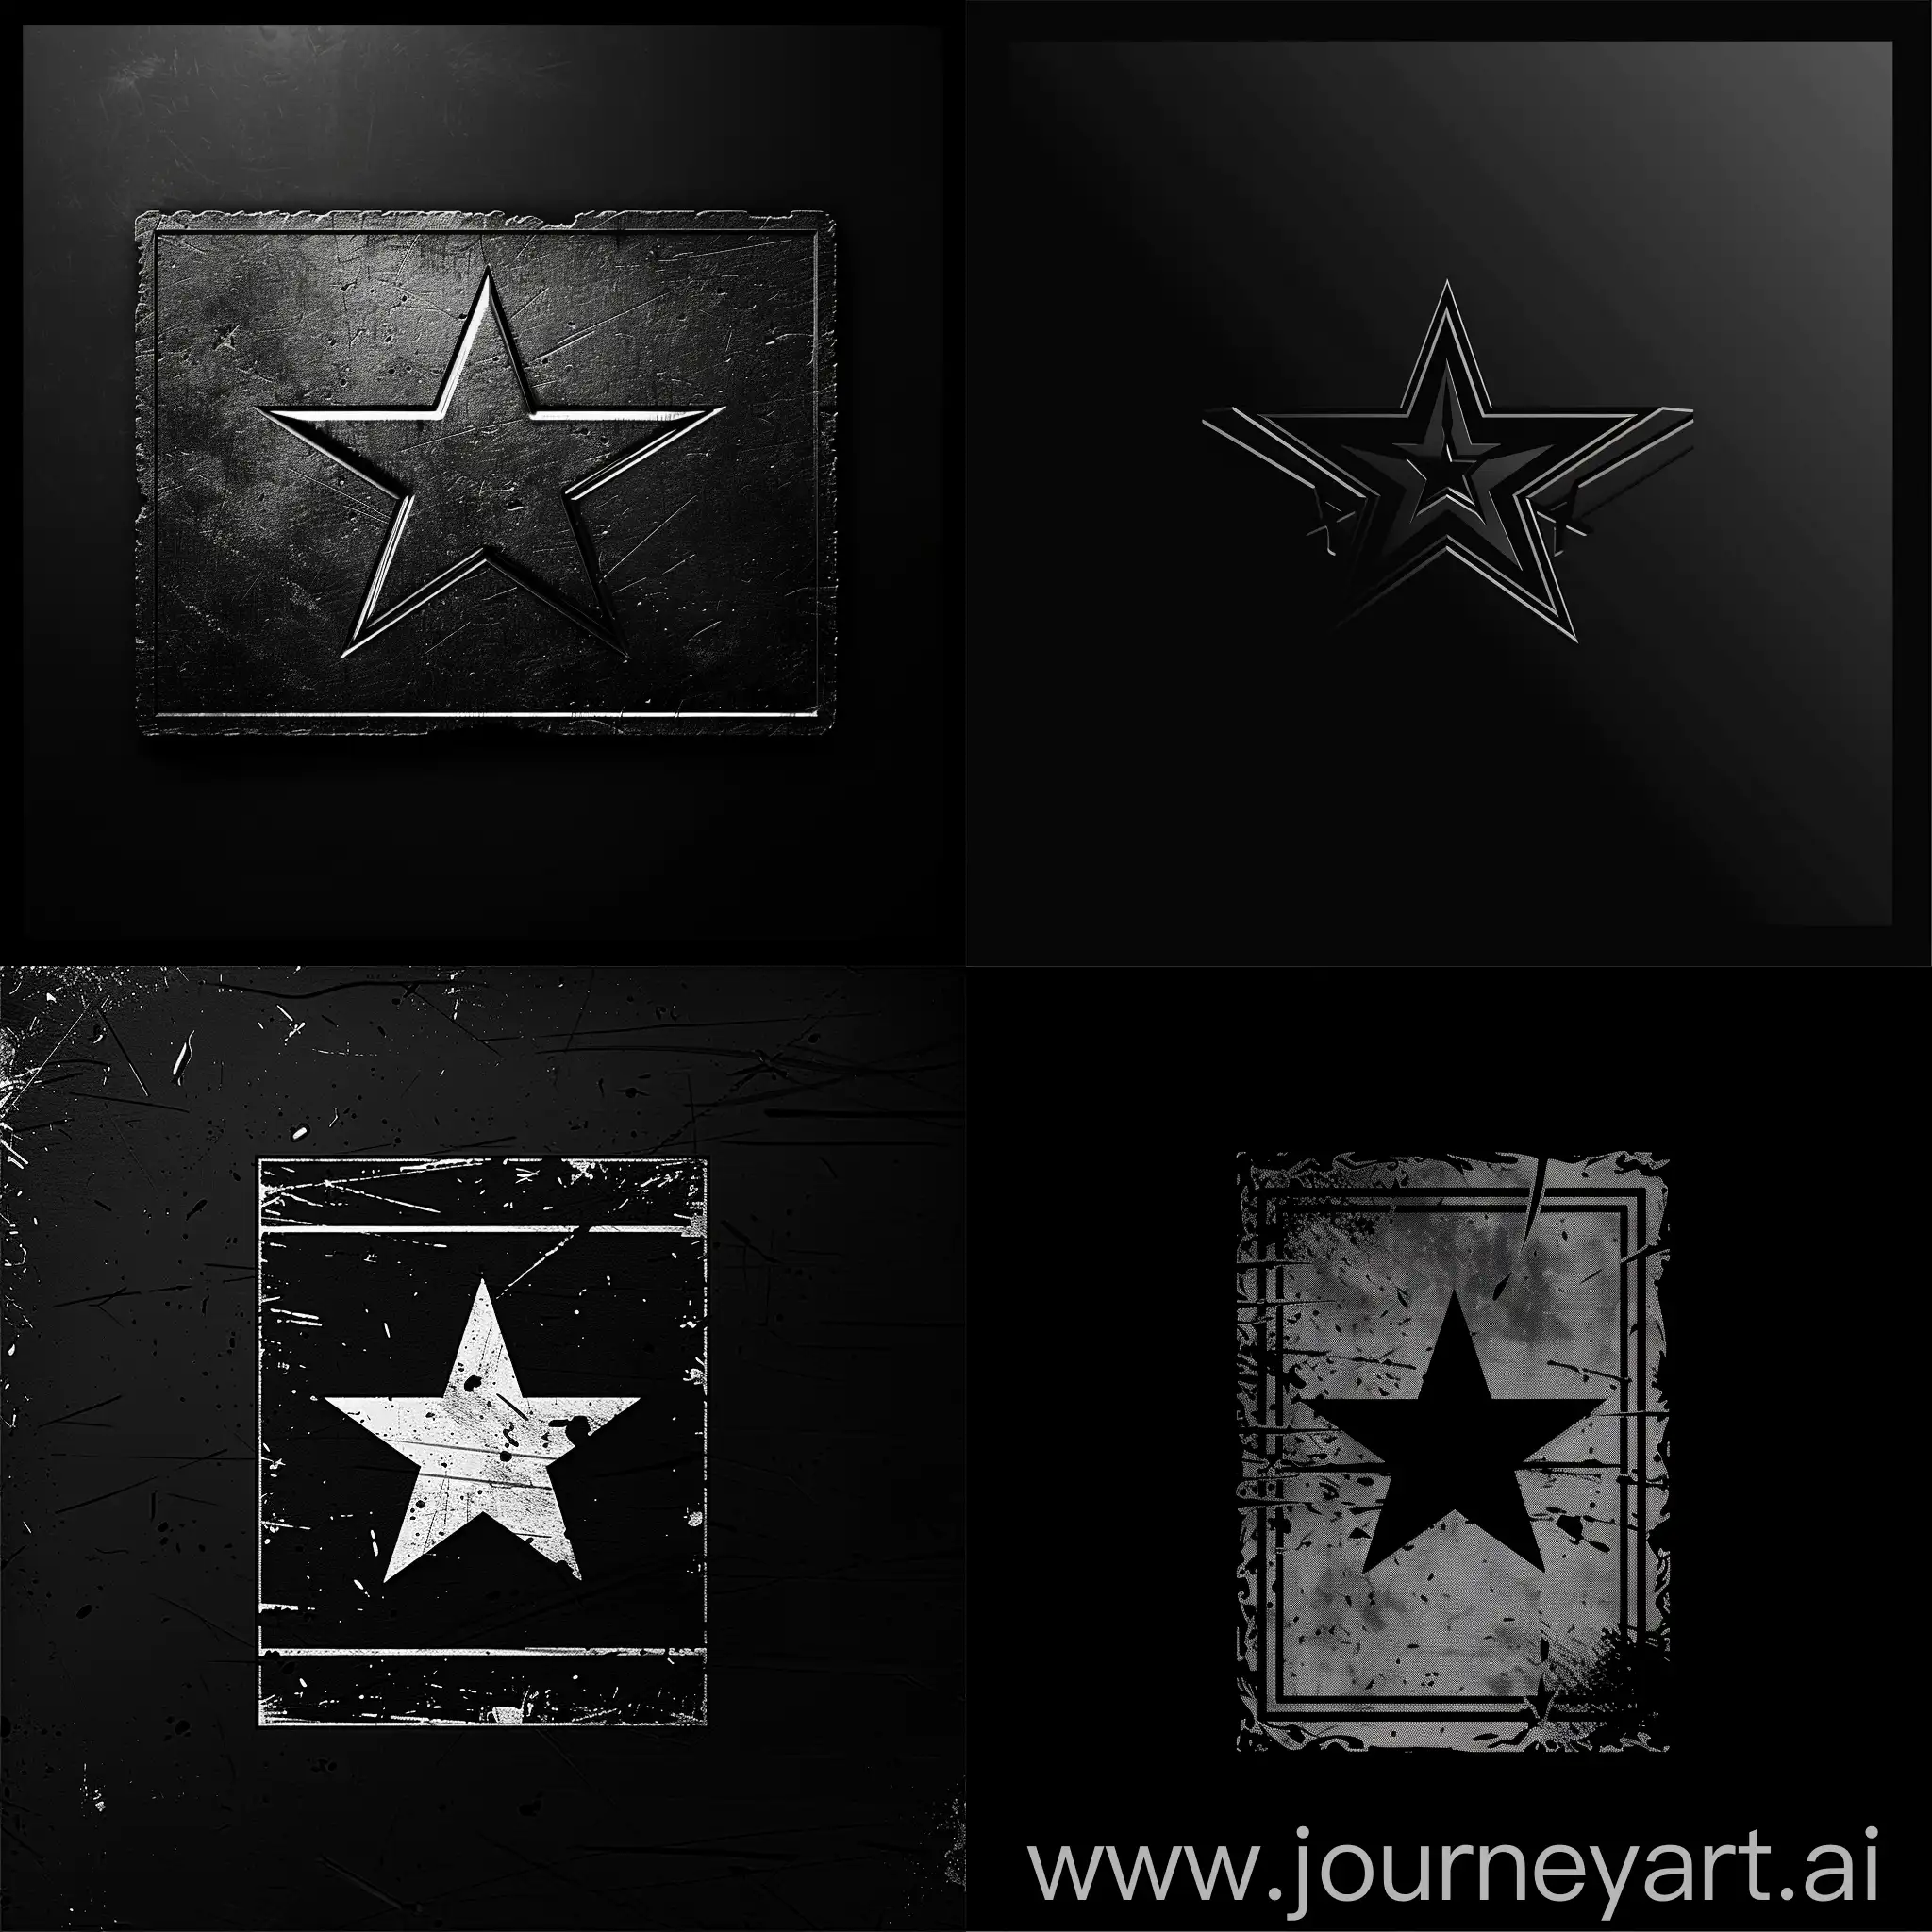 Draw a rectangular logo with a star on a black background, the logo itself should be made in a military theme come up with something that would make the logo look more interesting but at the same time be restrained